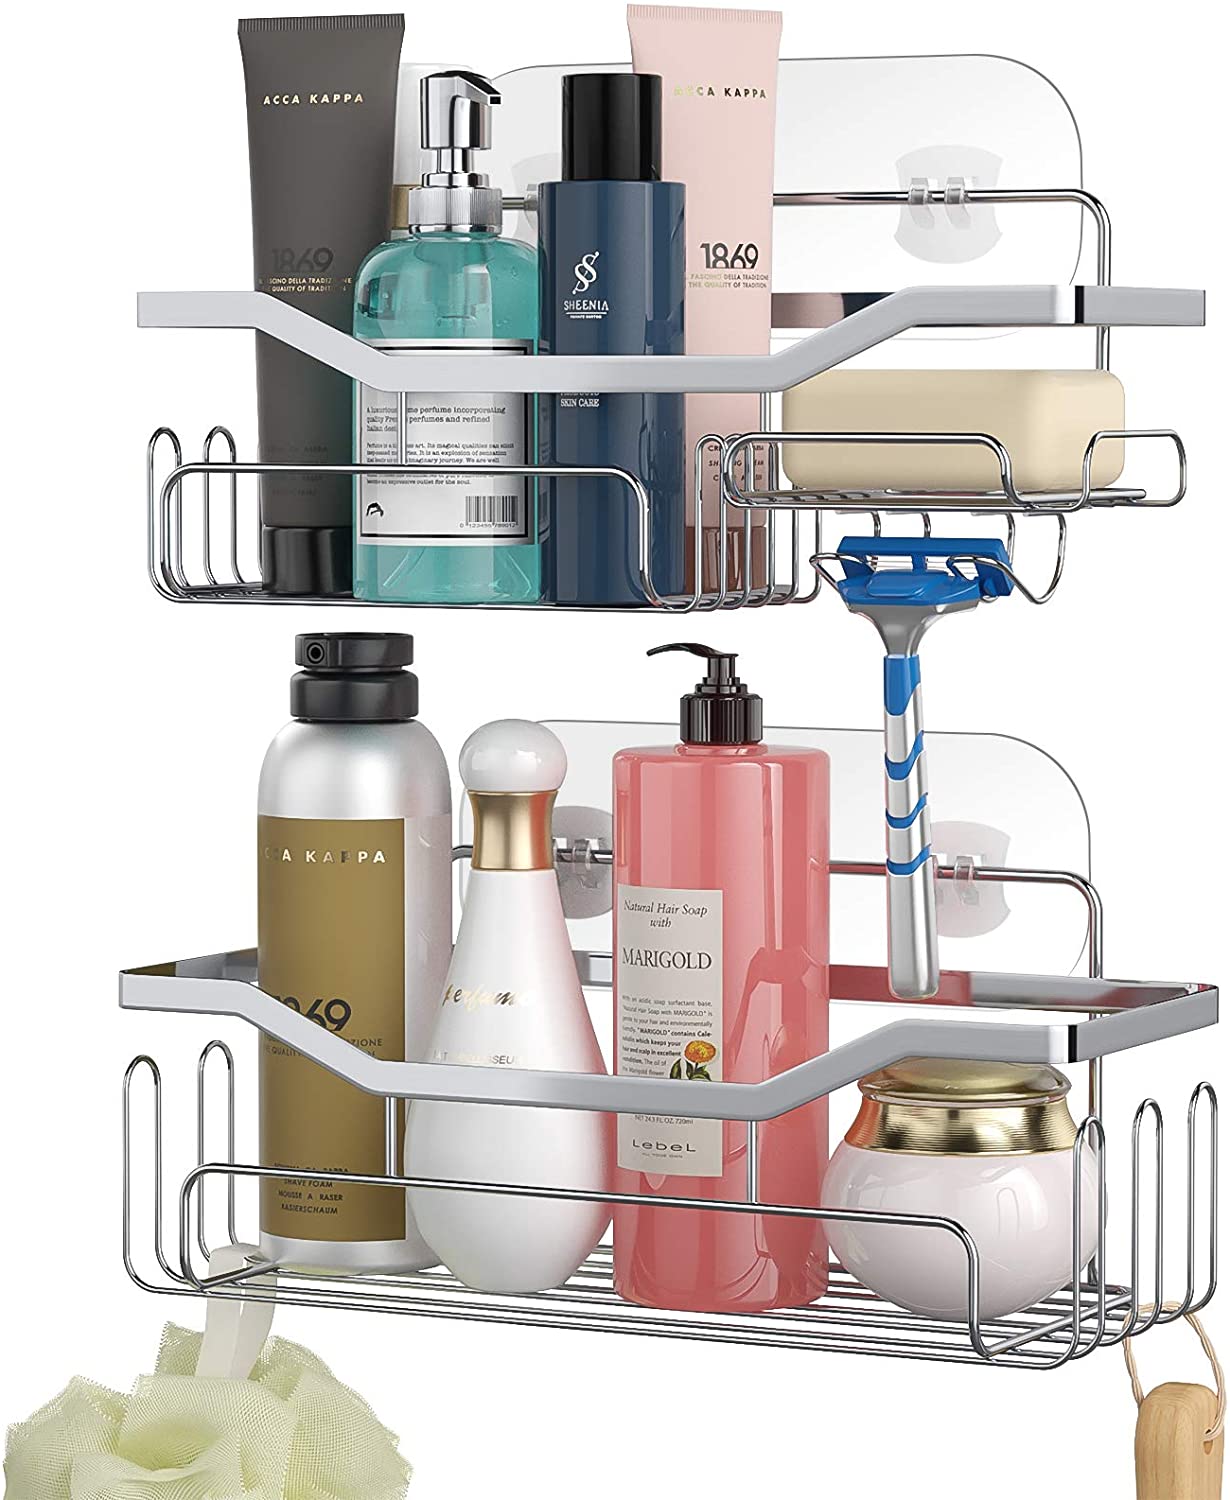 Use Old Shower Caddy as a Cleaning Caddy